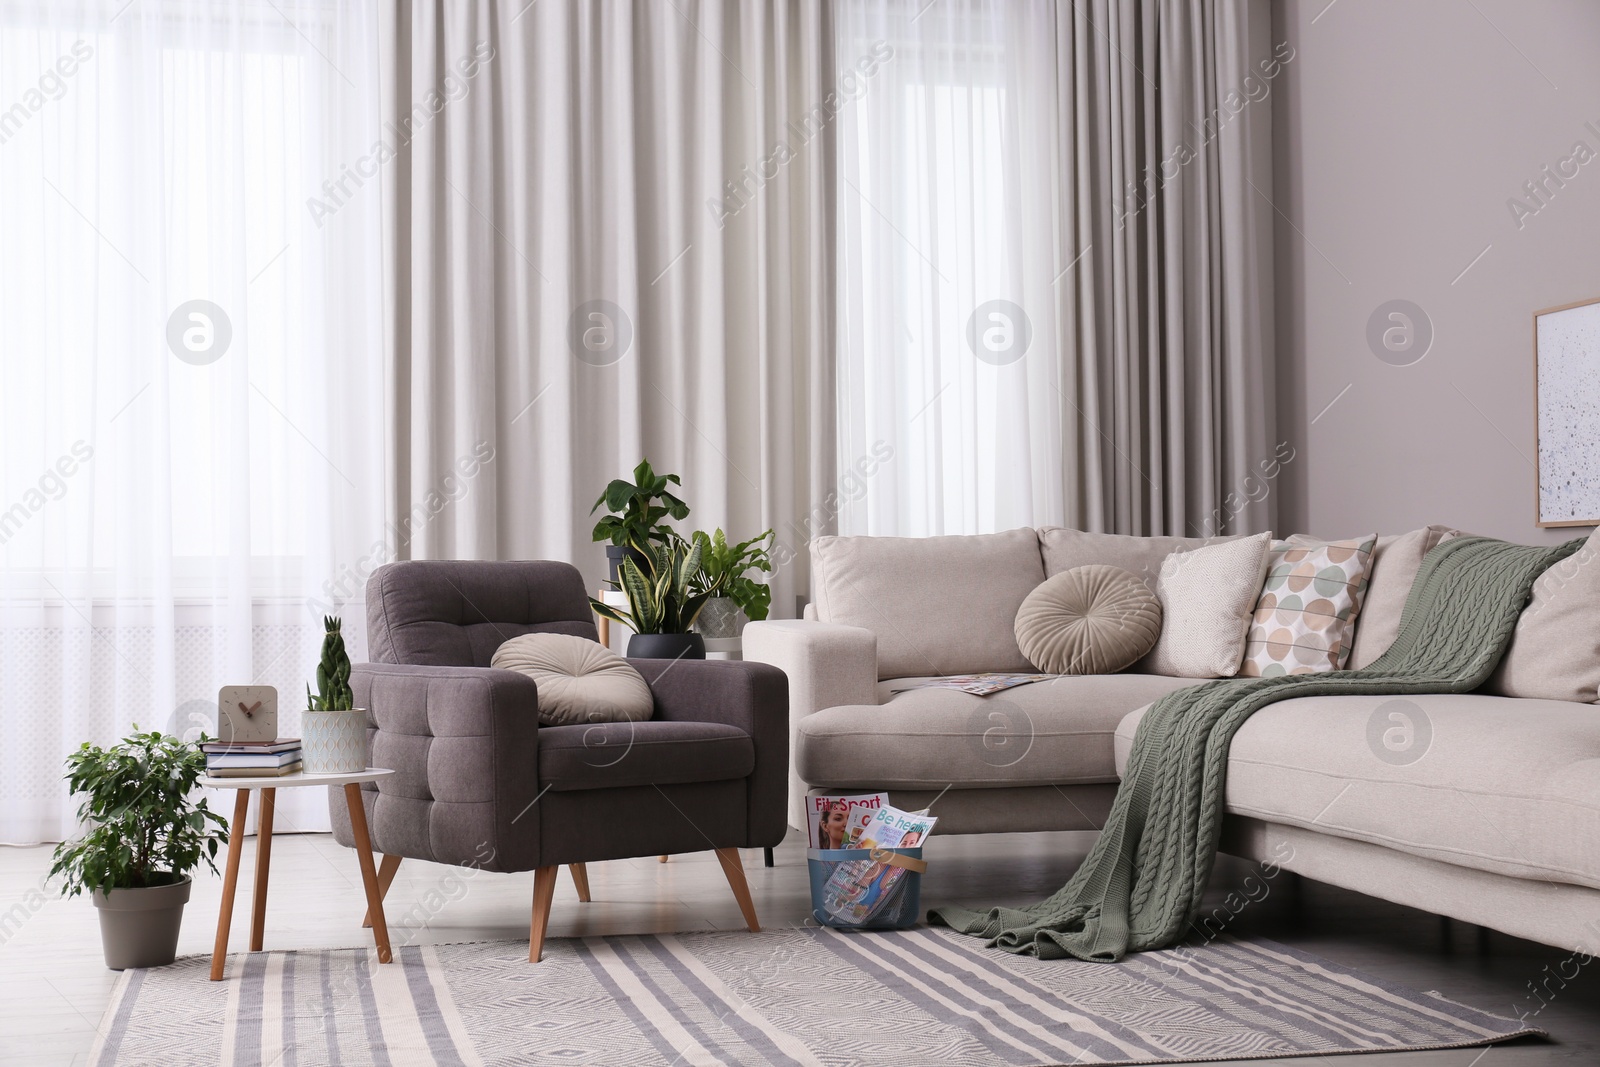 Photo of Comfortable armchair and sofa near window in living room. Interior design